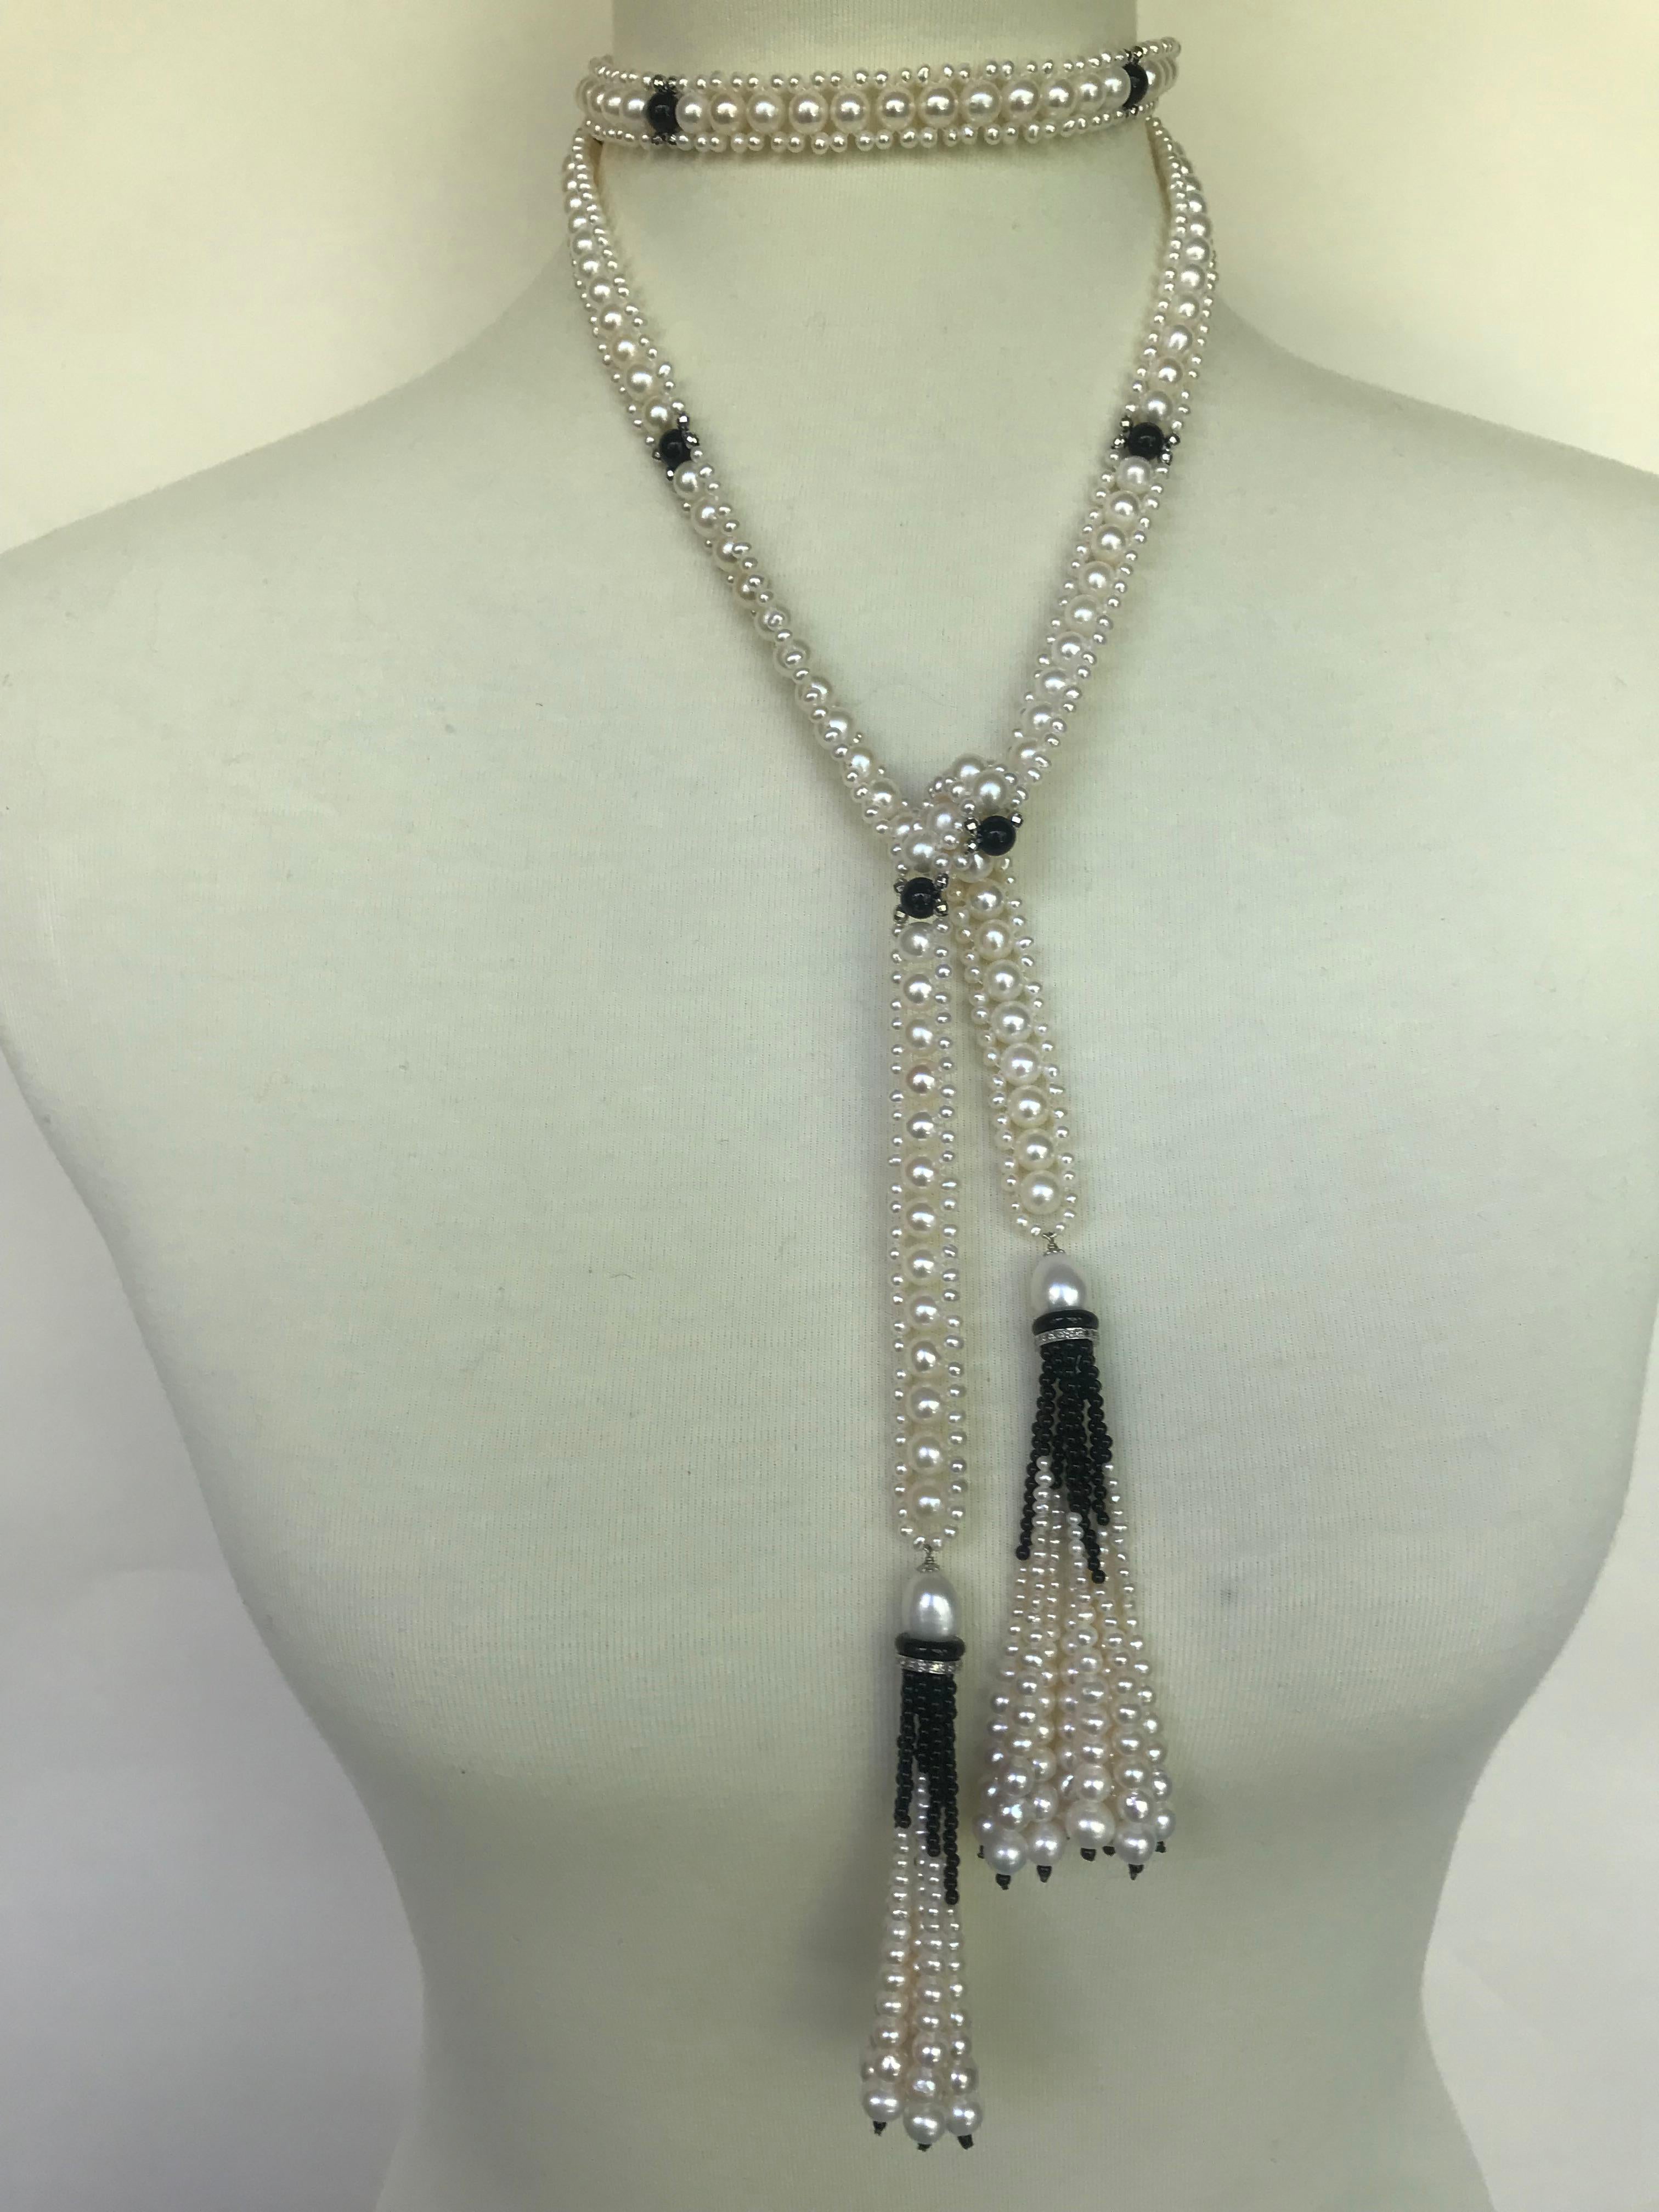 Marina J Woven Pearl Sautoir with Tassels and 14 K White Gold and Onyx beads 1